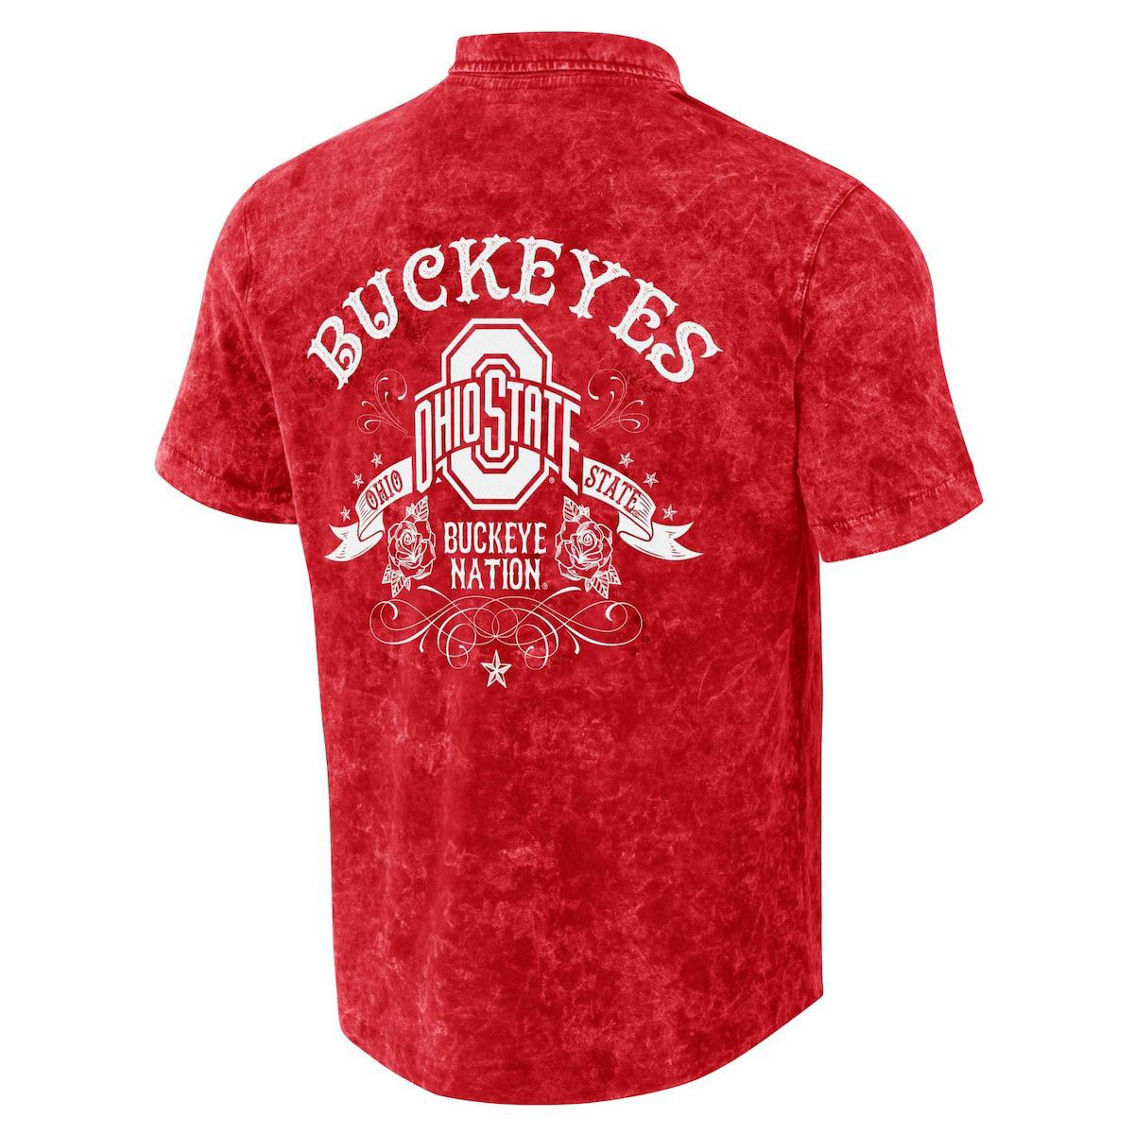 Darius Rucker Collection by Fanatics Men's Darius Rucker Collection by Fanatics Scarlet Ohio State Buckeyes Team Color Button-Up Shirt - Image 4 of 4